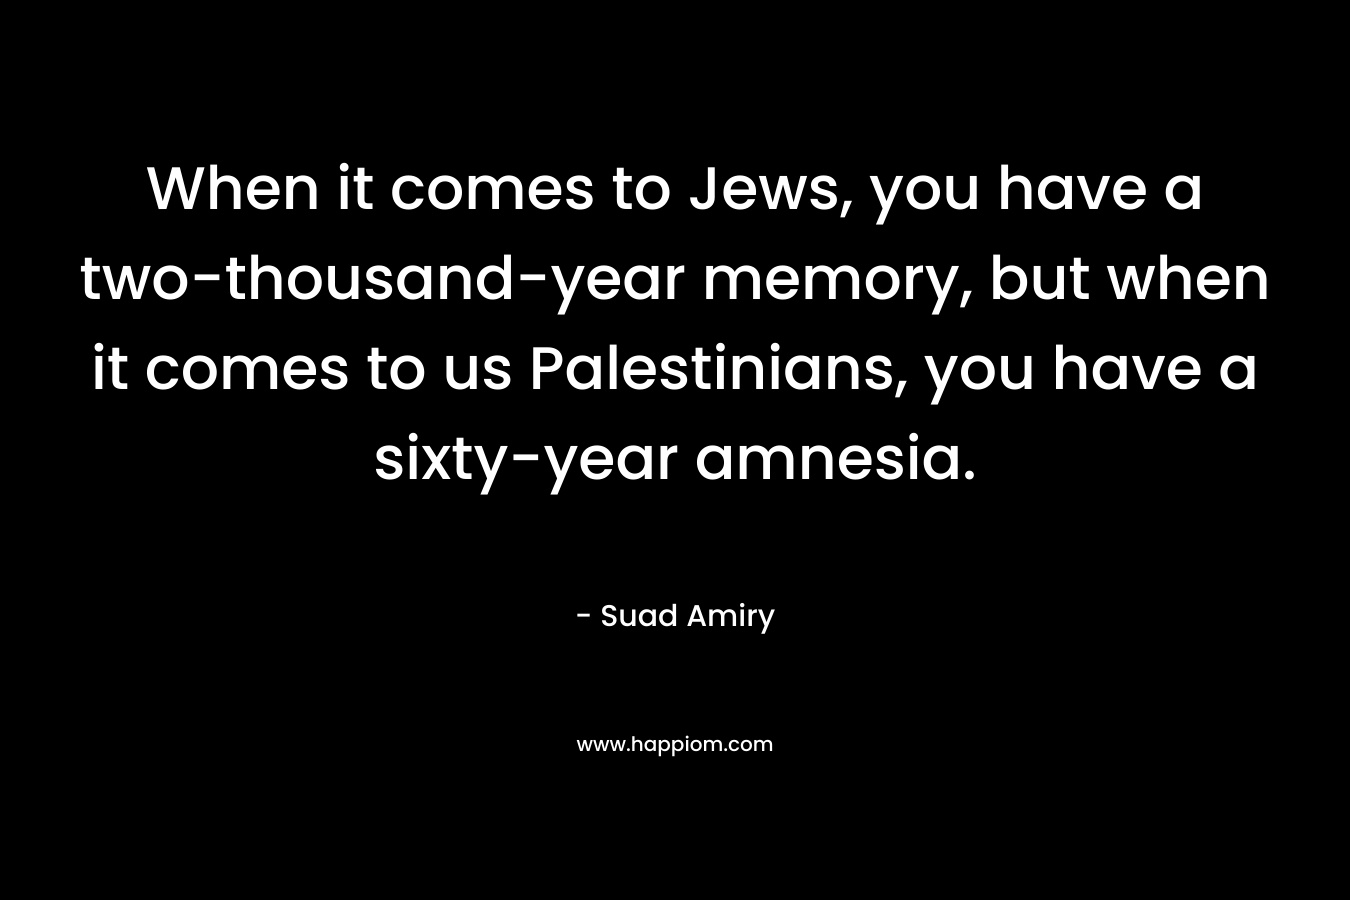 When it comes to Jews, you have a two-thousand-year memory, but when it comes to us Palestinians, you have a sixty-year amnesia. – Suad Amiry